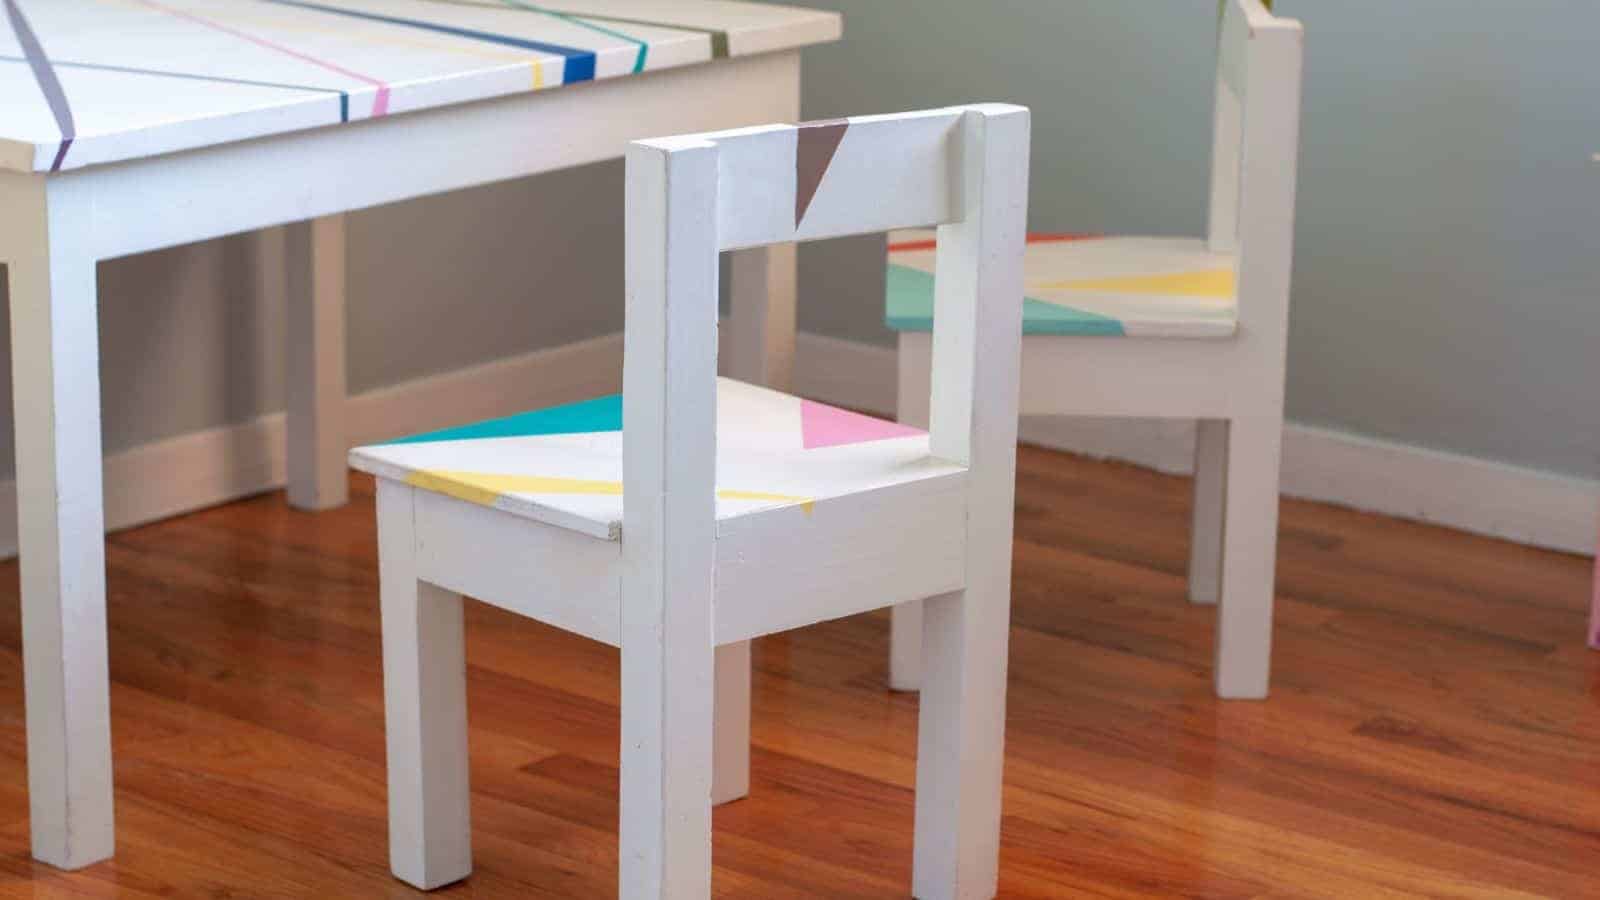 <p>Finding the perfect piece of kid’s furniture can be challenging. Instead of settling for something that you don’t like, build your own kid’s table and chair set. This is an excellent beginner furniture project that your kids will love! <a href="https://www.anikasdiylife.com/easy-diy-kids-table-and-chair-set/">Get the plans to build it here.</a></p>